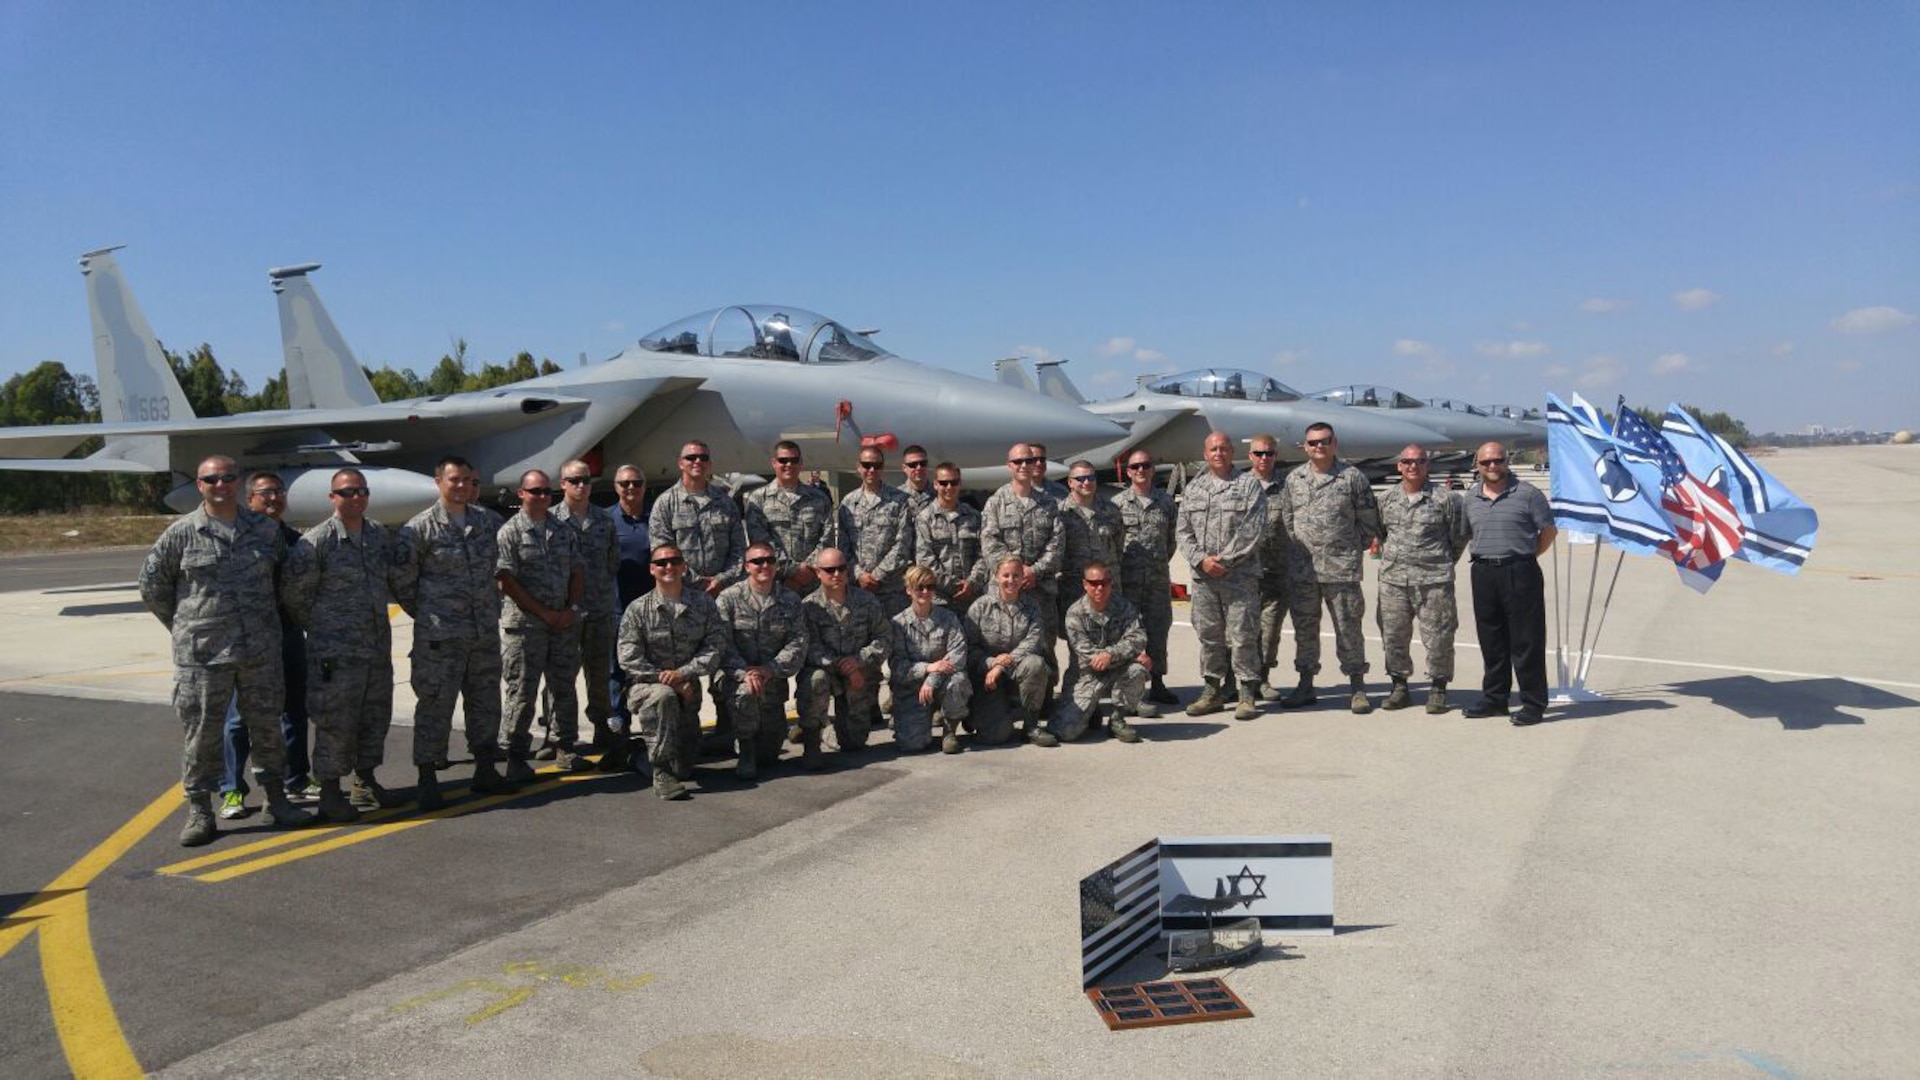 Airmen from the 173rd Fighter Wing, Oregon Air National Guard, pose with for a group photo in front of the just delivered F-15 Eagles at Tel Nof air base in Israel. After two years of planning and final execution, the wing participated in a historic active ramp to ramp transfer of aircraft. 